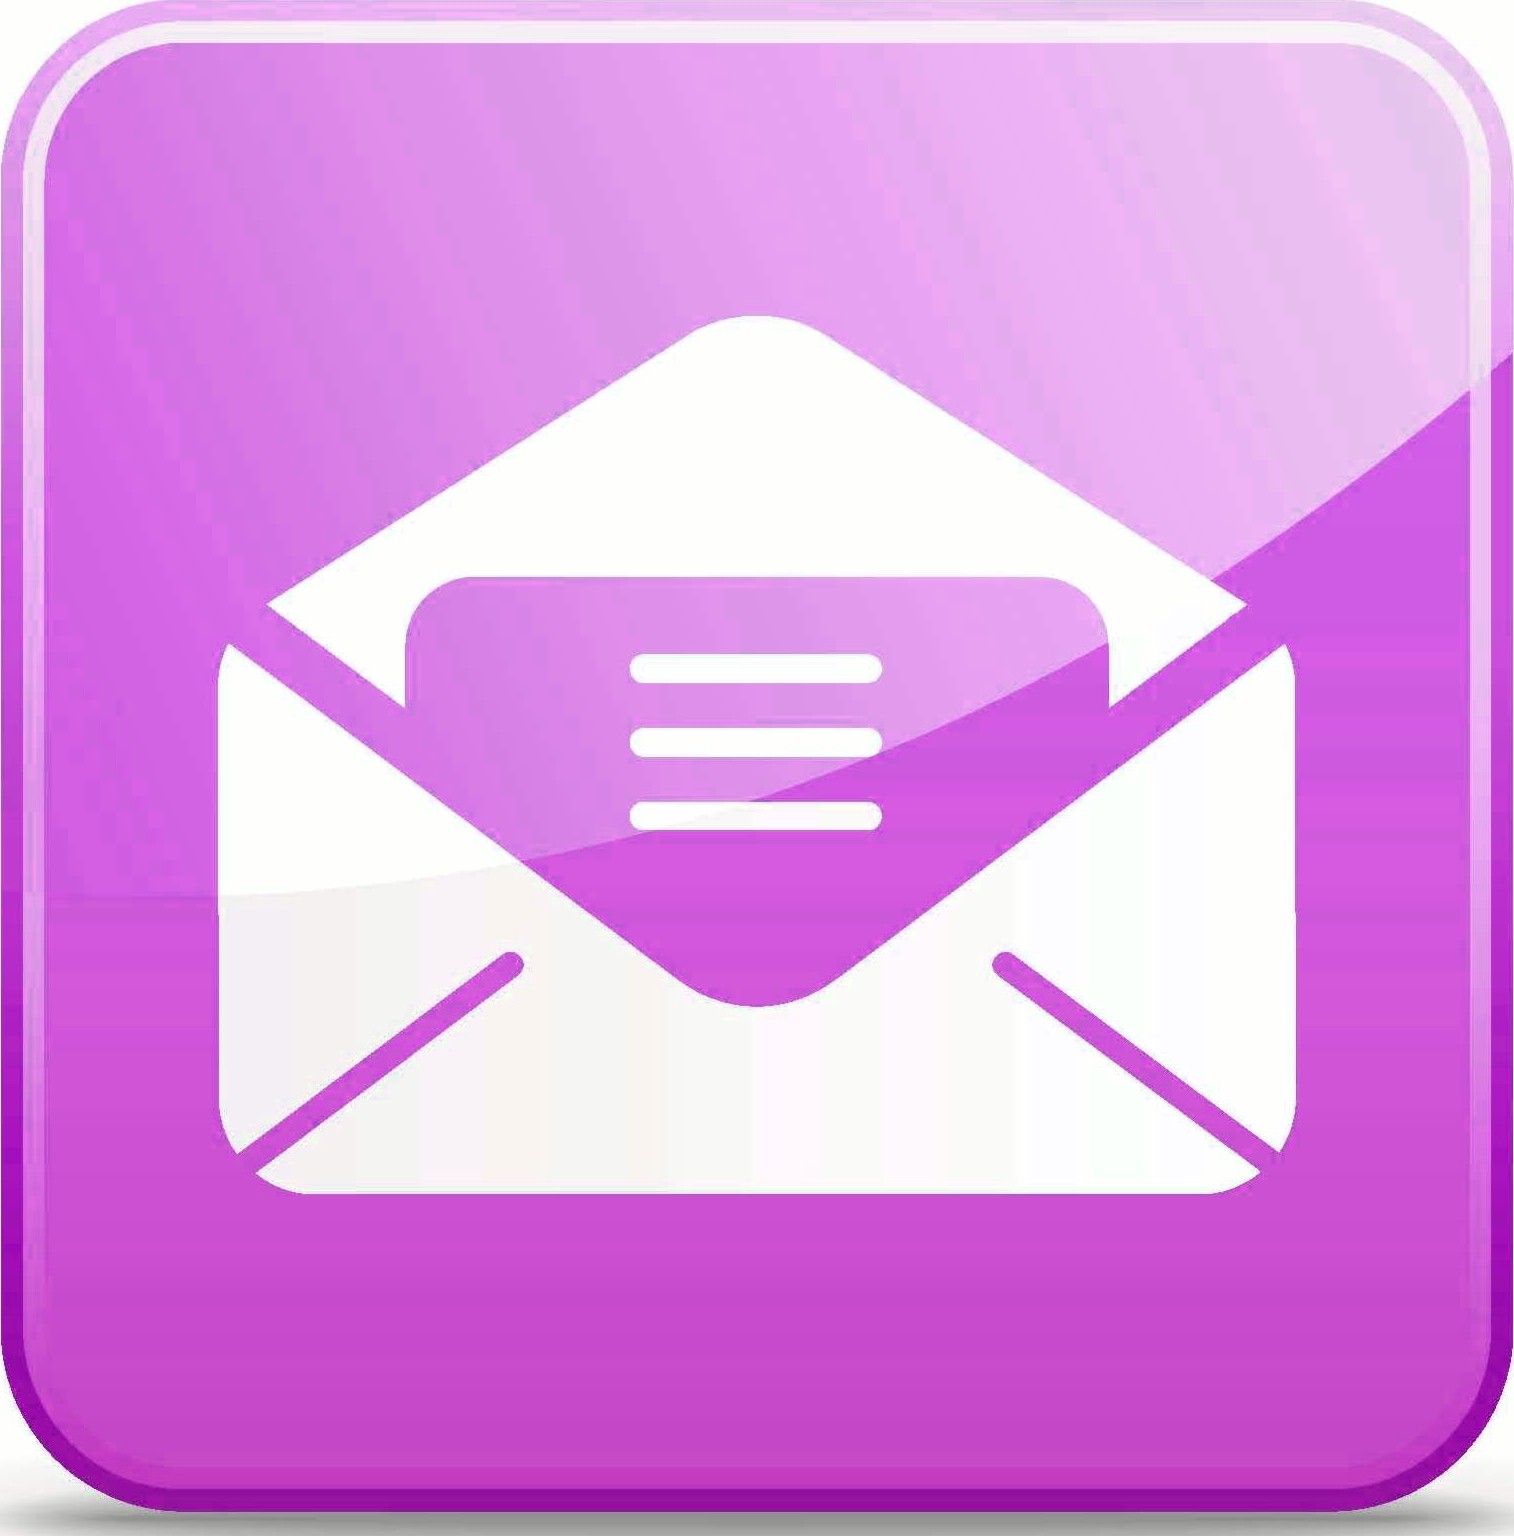 Send an email to Helpdesk